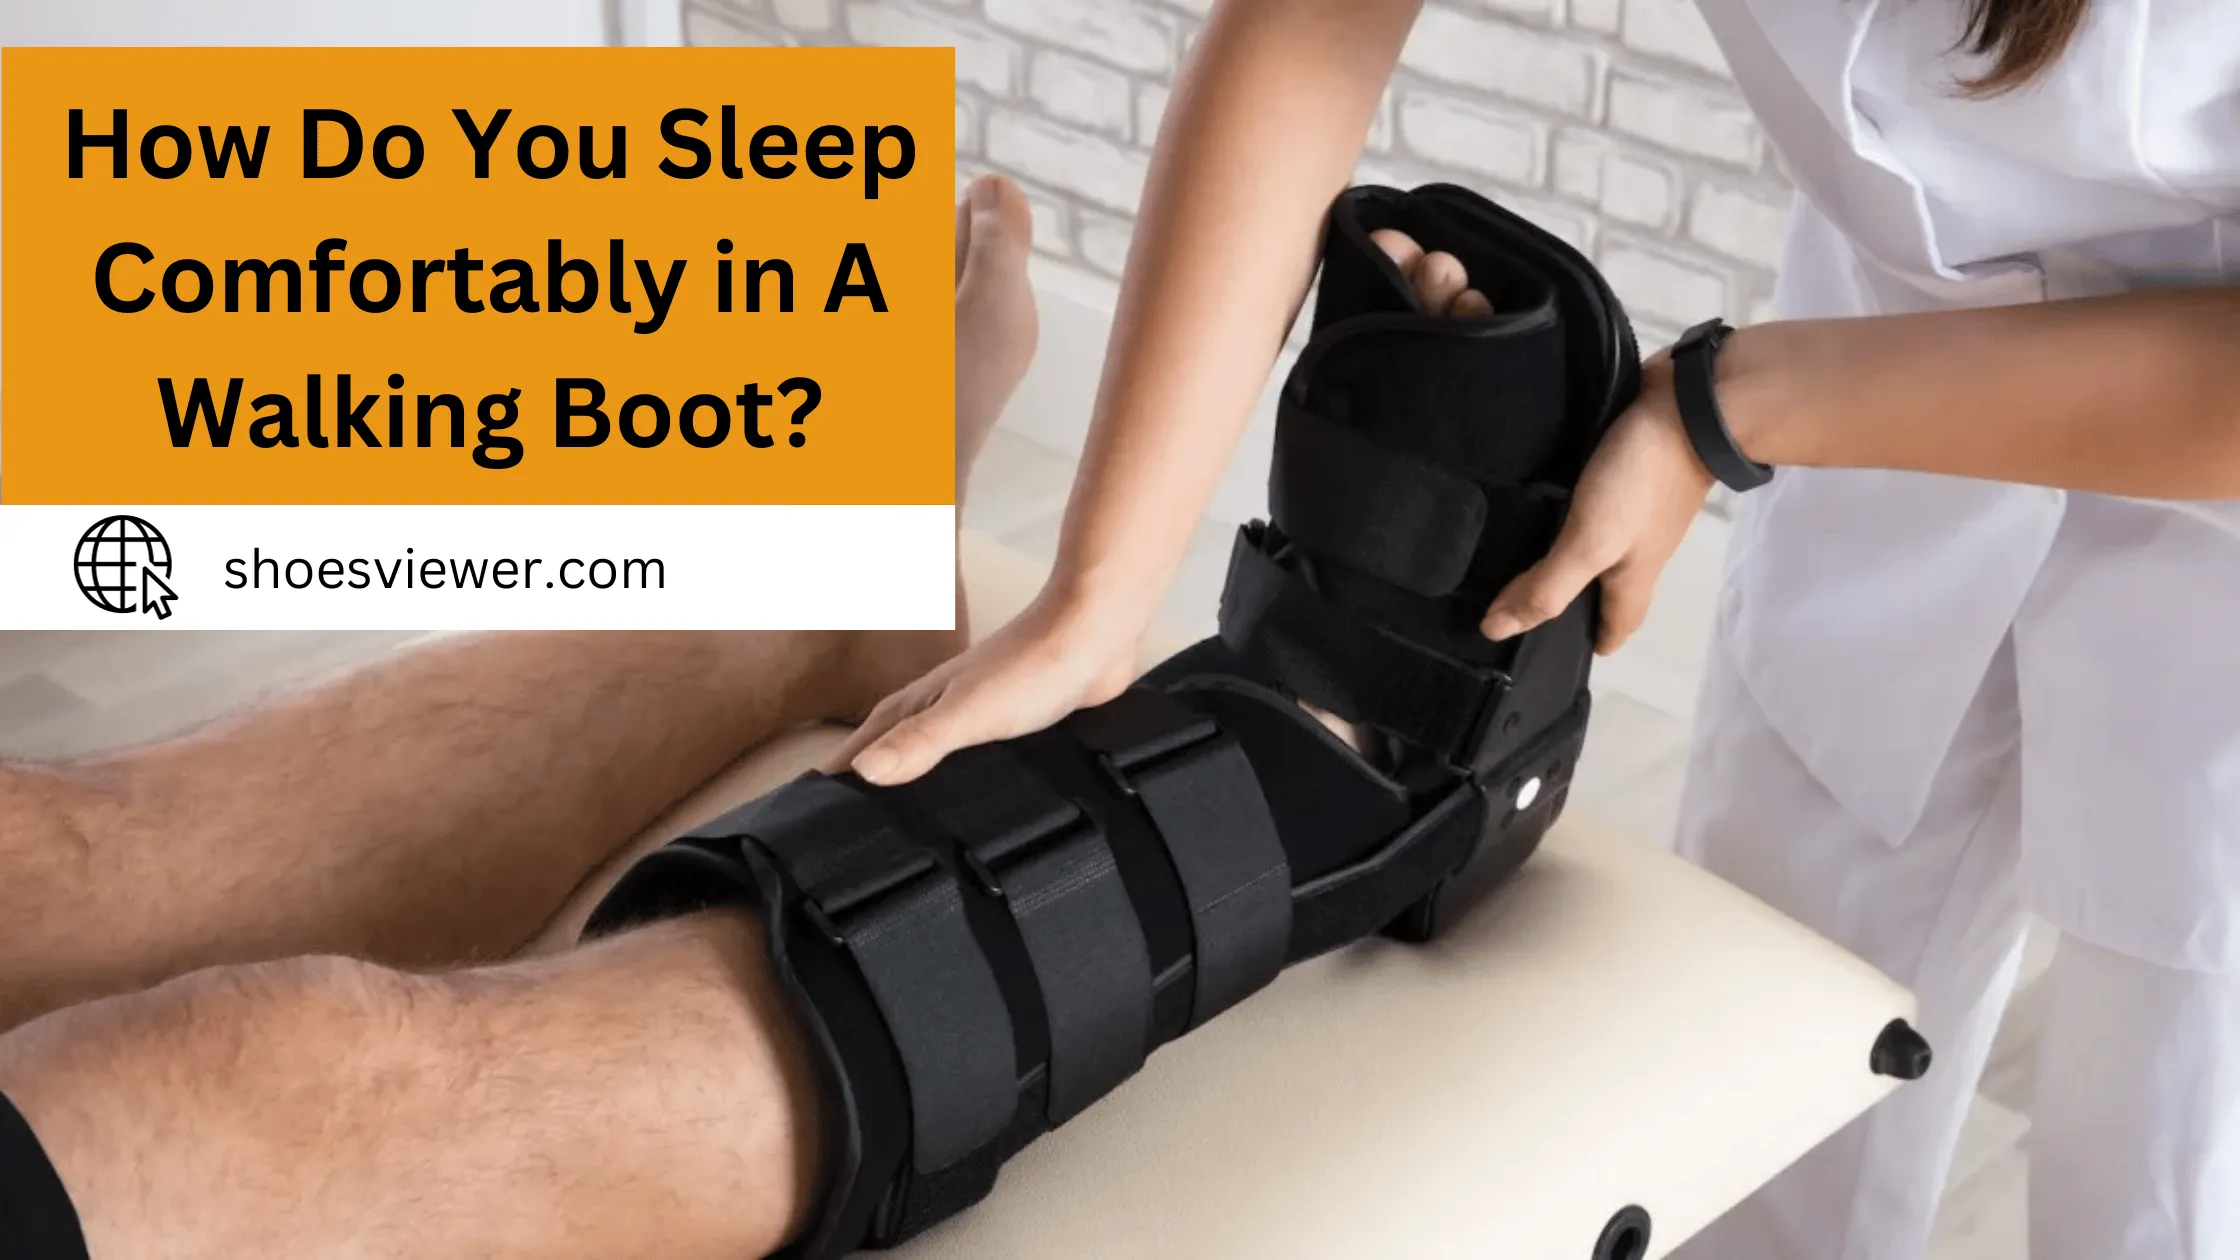 How Do You Sleep Comfortably In A Walking Boot?